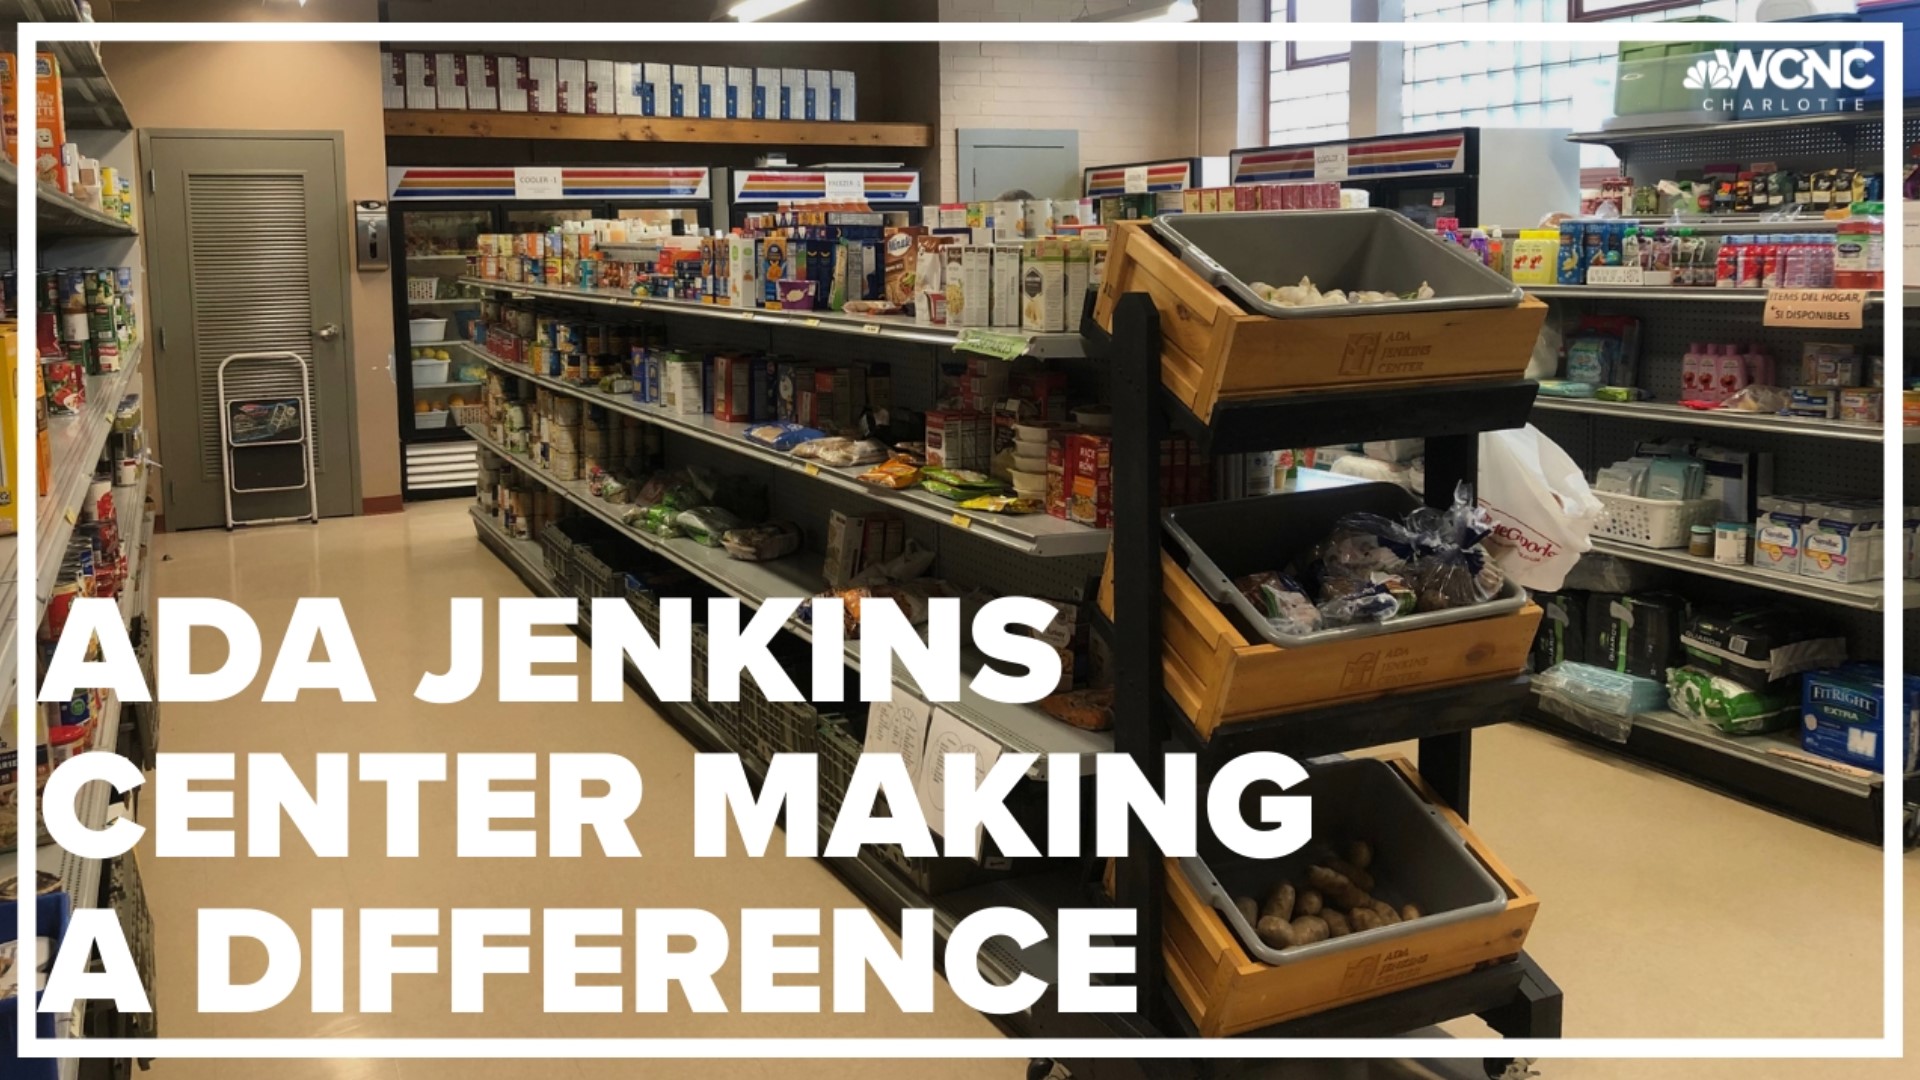 From helping kids to financial assistance for families, the Ada Jenkins Center's outreach is invaluable.